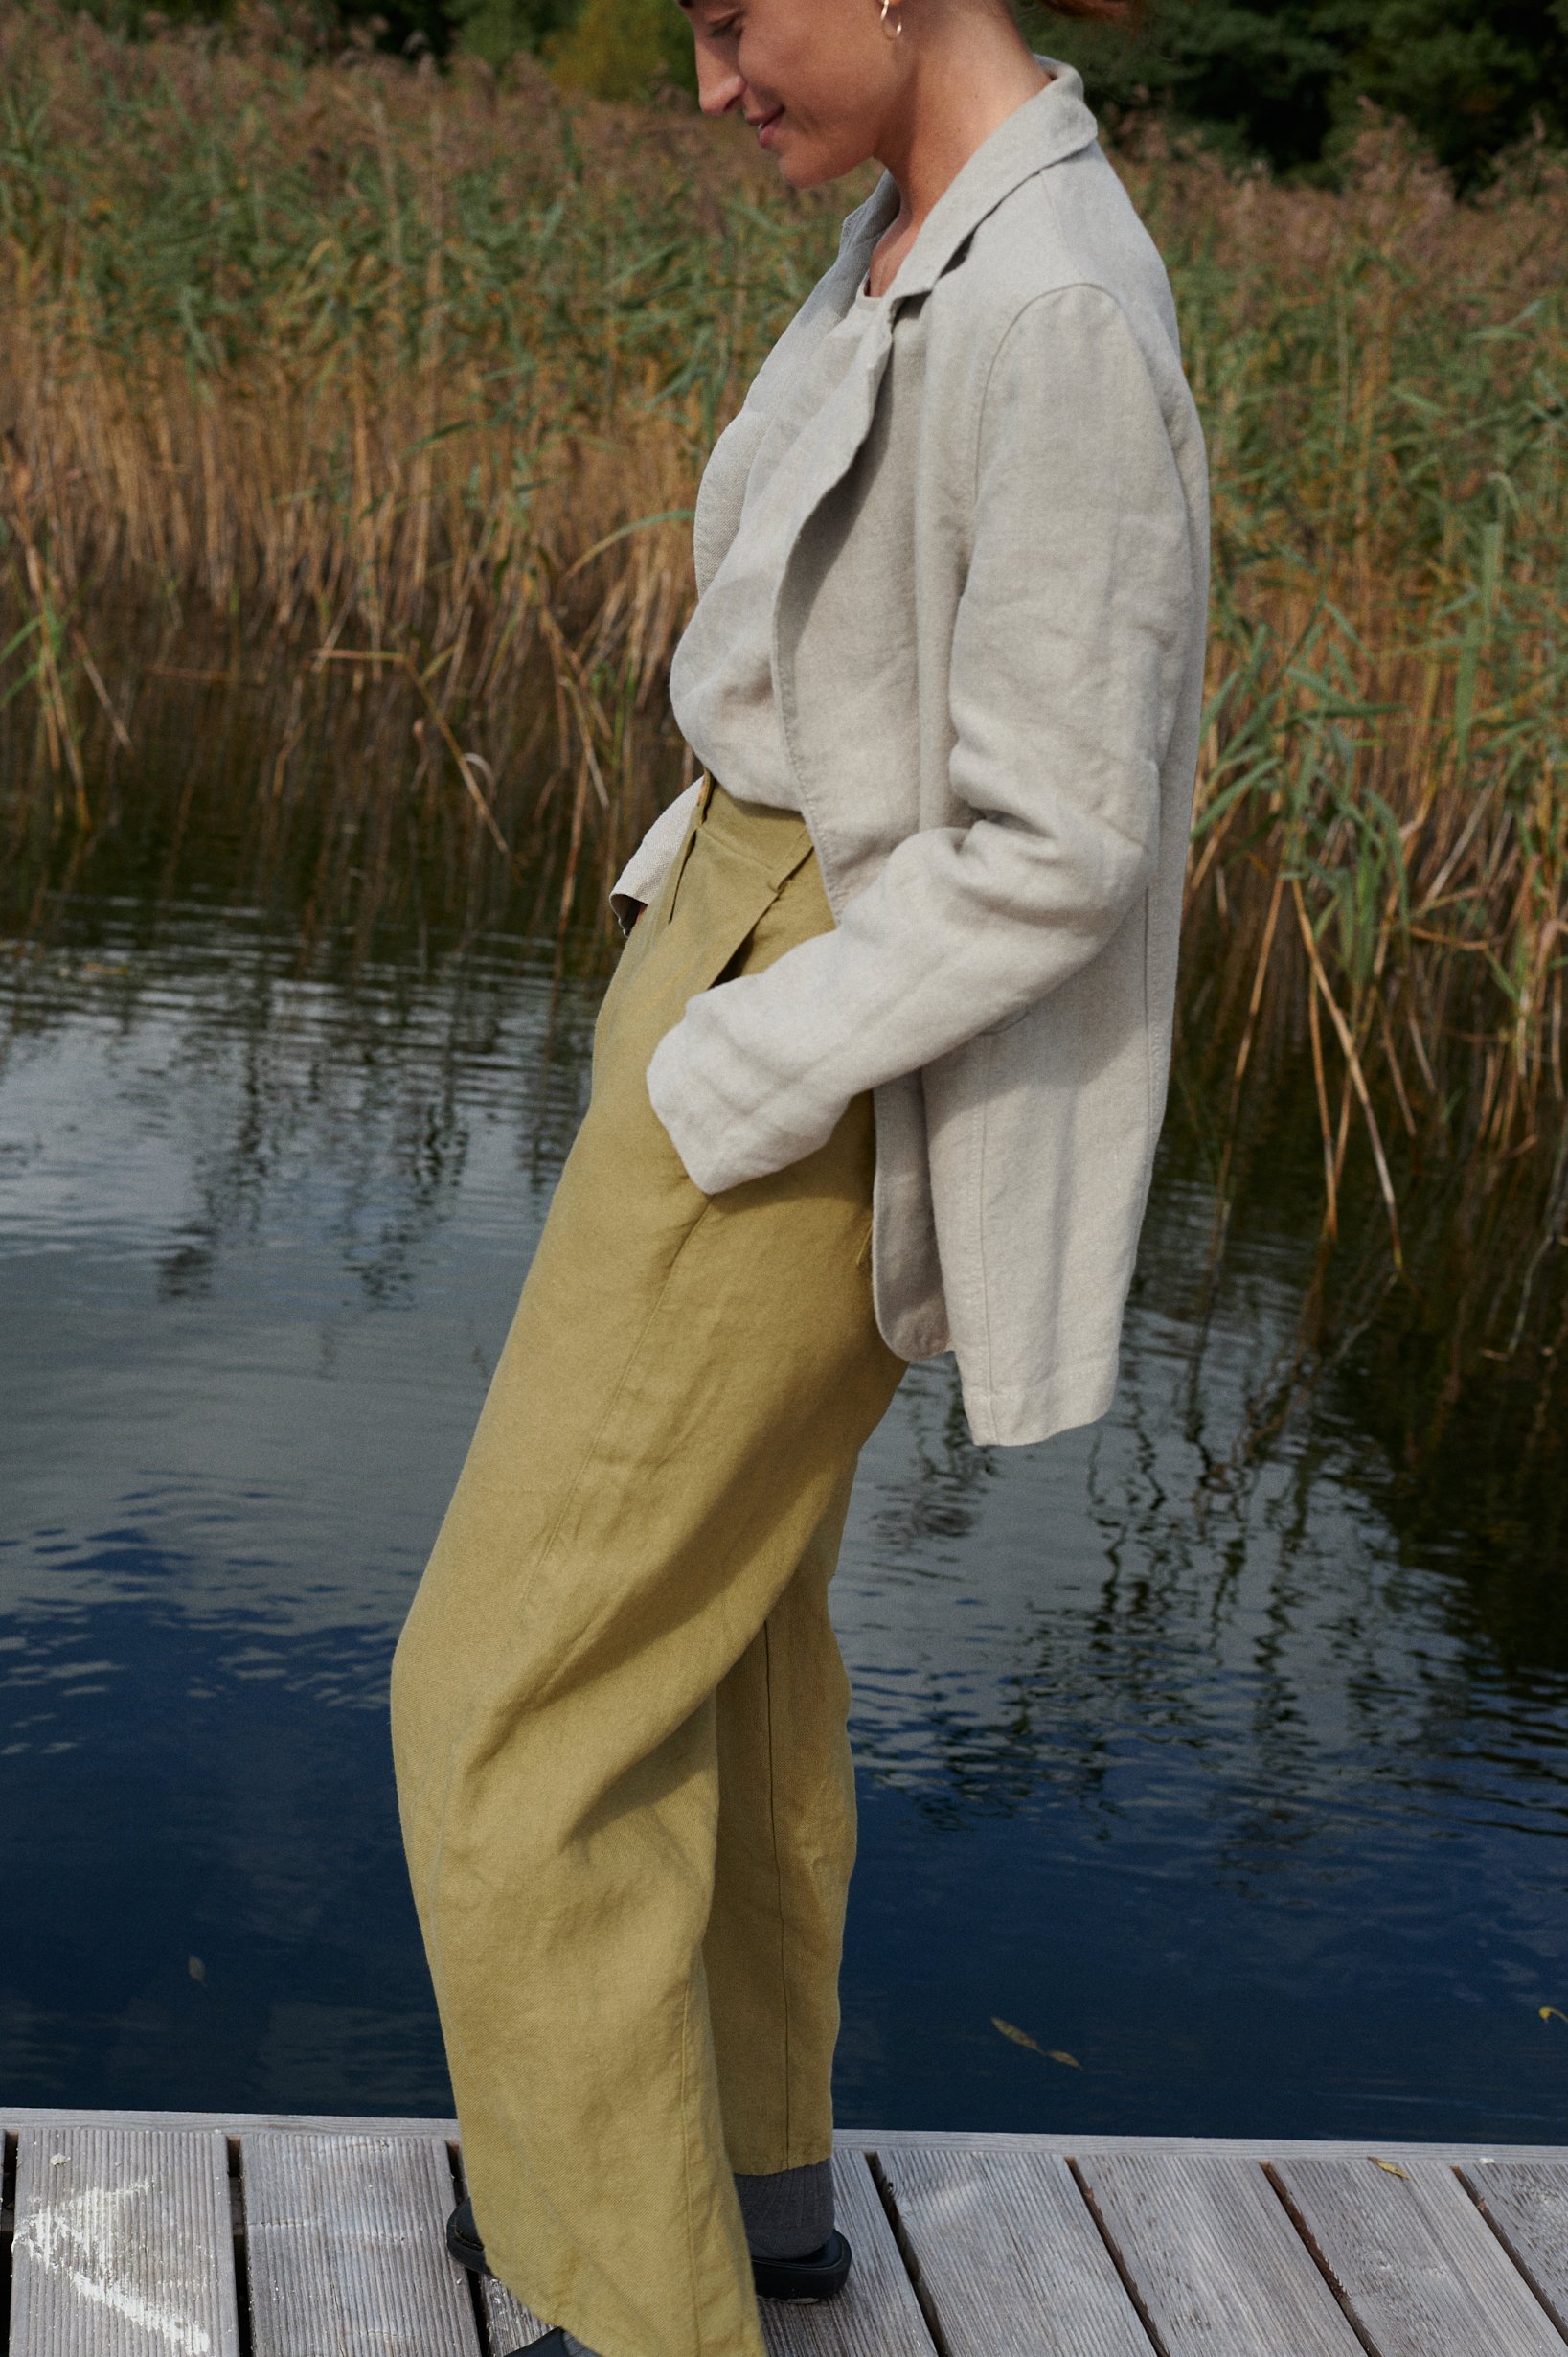 The side pockets of heavy linen high waisted pants in olive